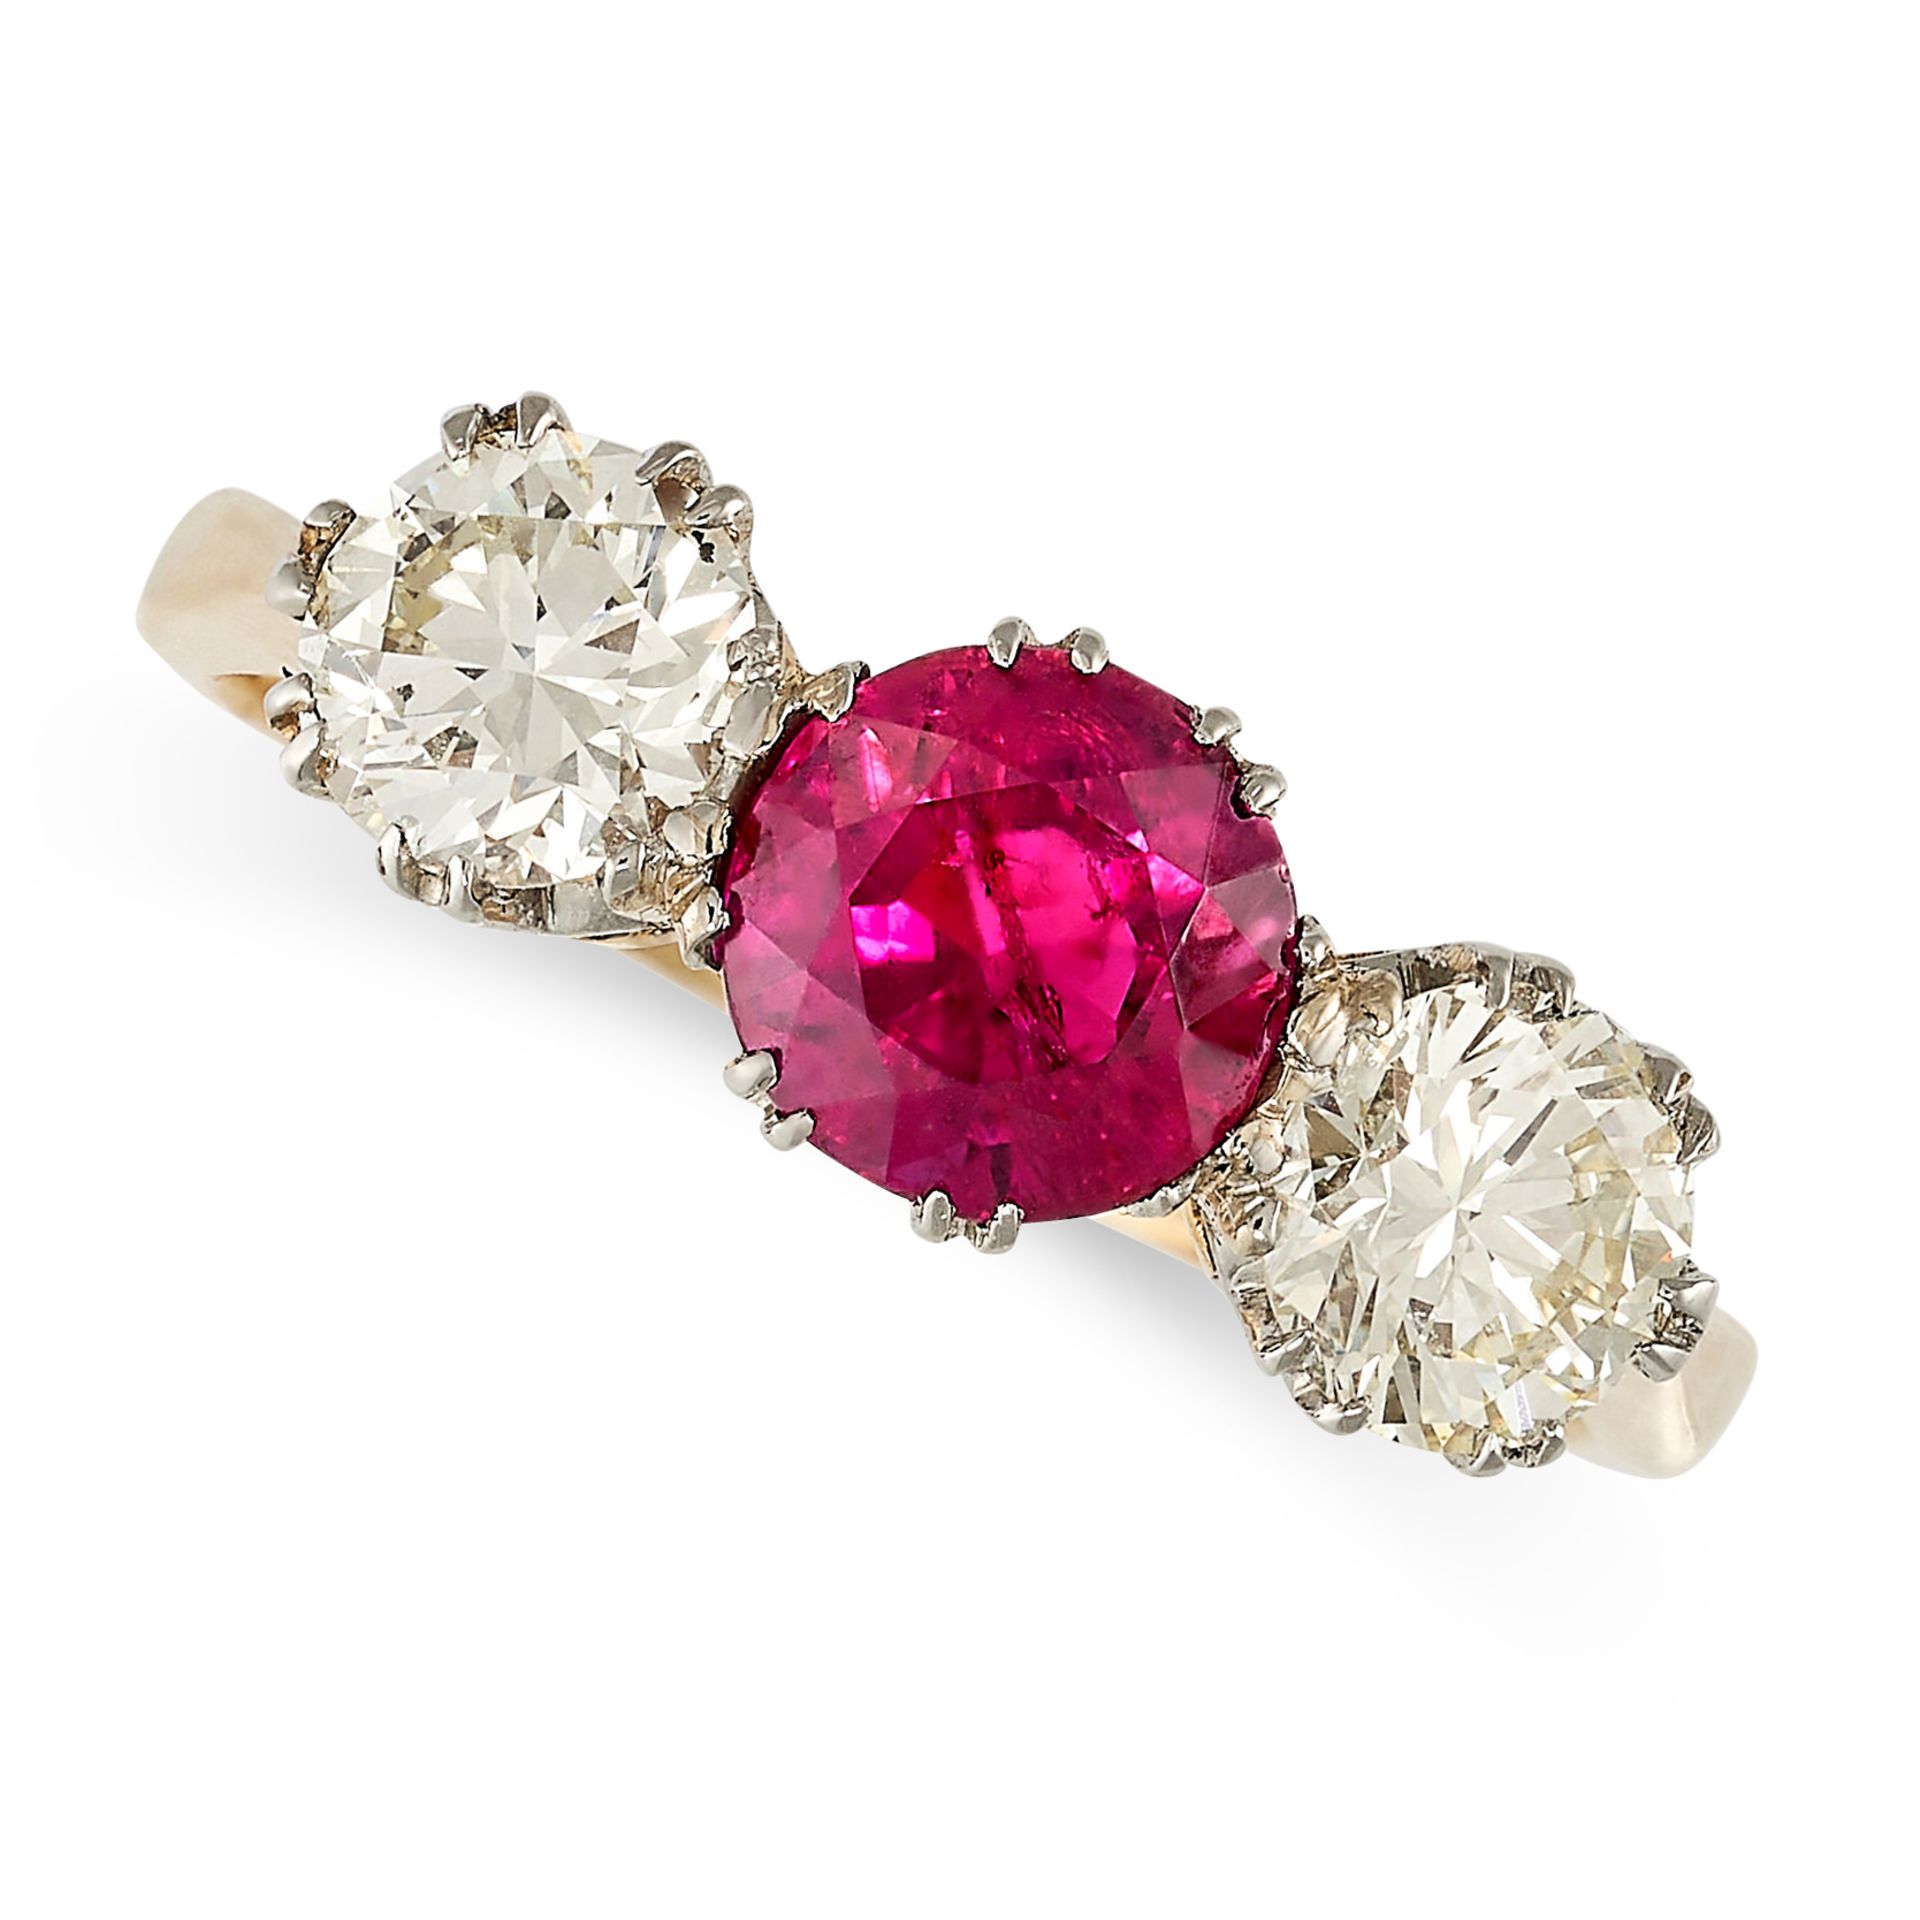 A RUBY AND DIAMOND THREE STONE RING set with a round cut ruby of 1.35 carats accented by two round